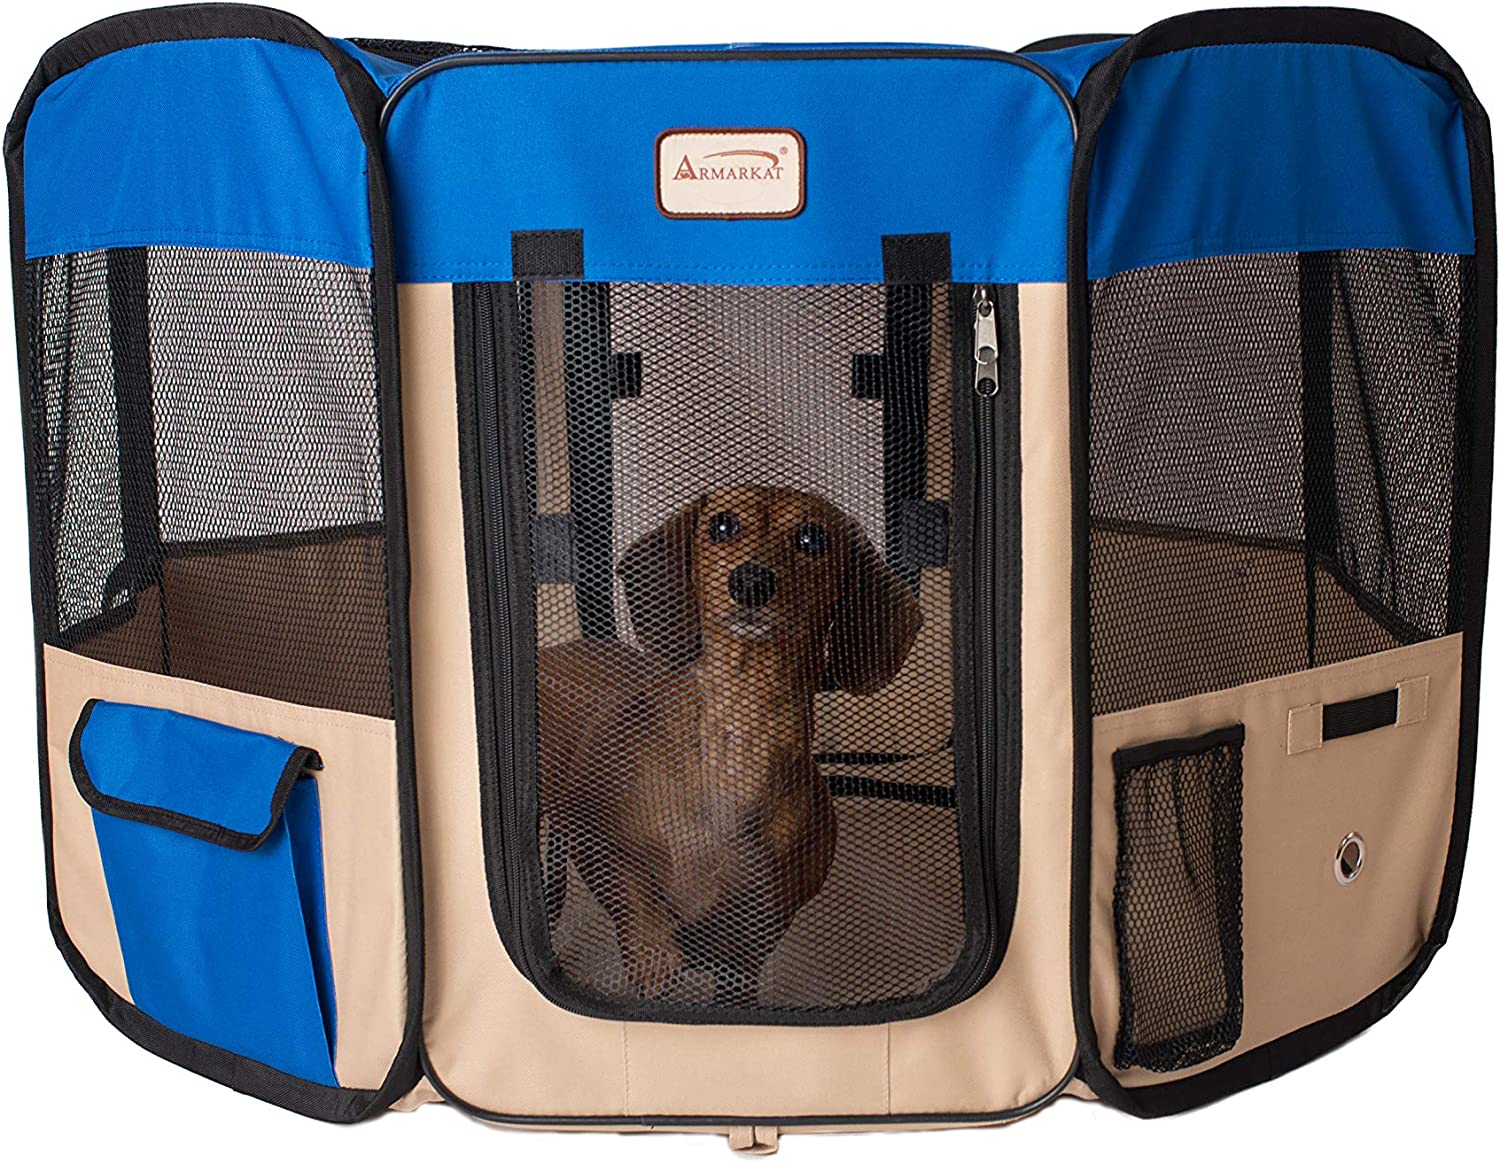 Armarkat Model PP001B Portable Pet Playpen in Blue and Beige Combo